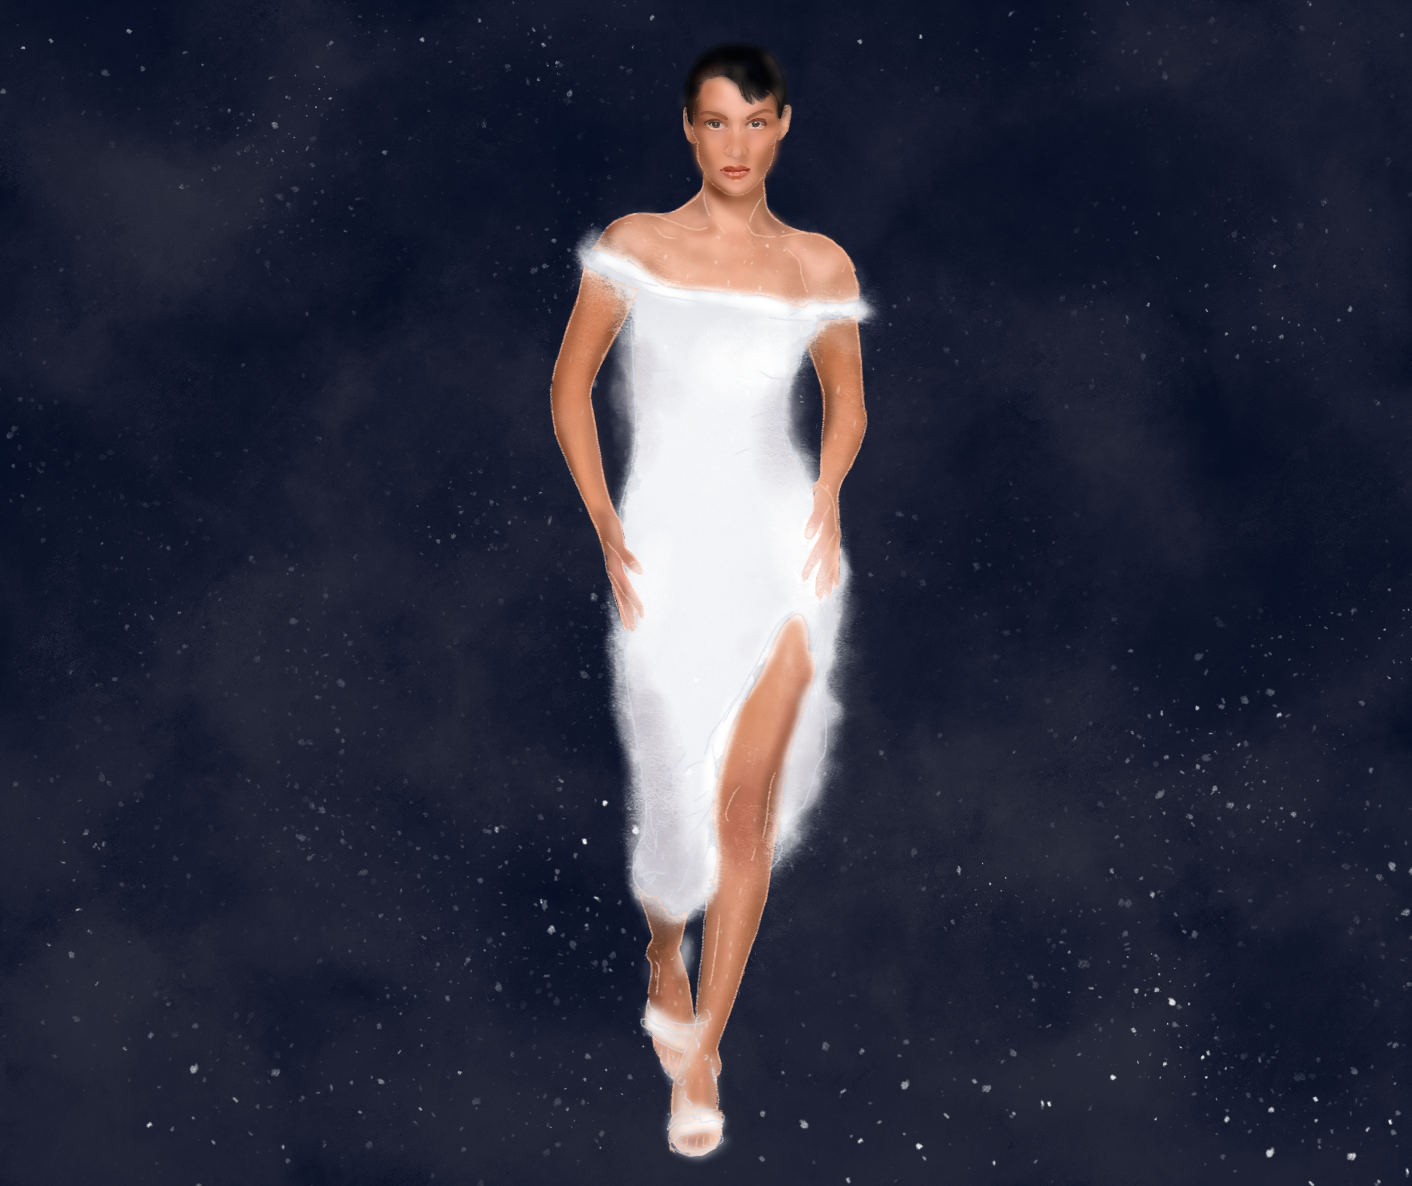 3d render of a roblox character in a white dress